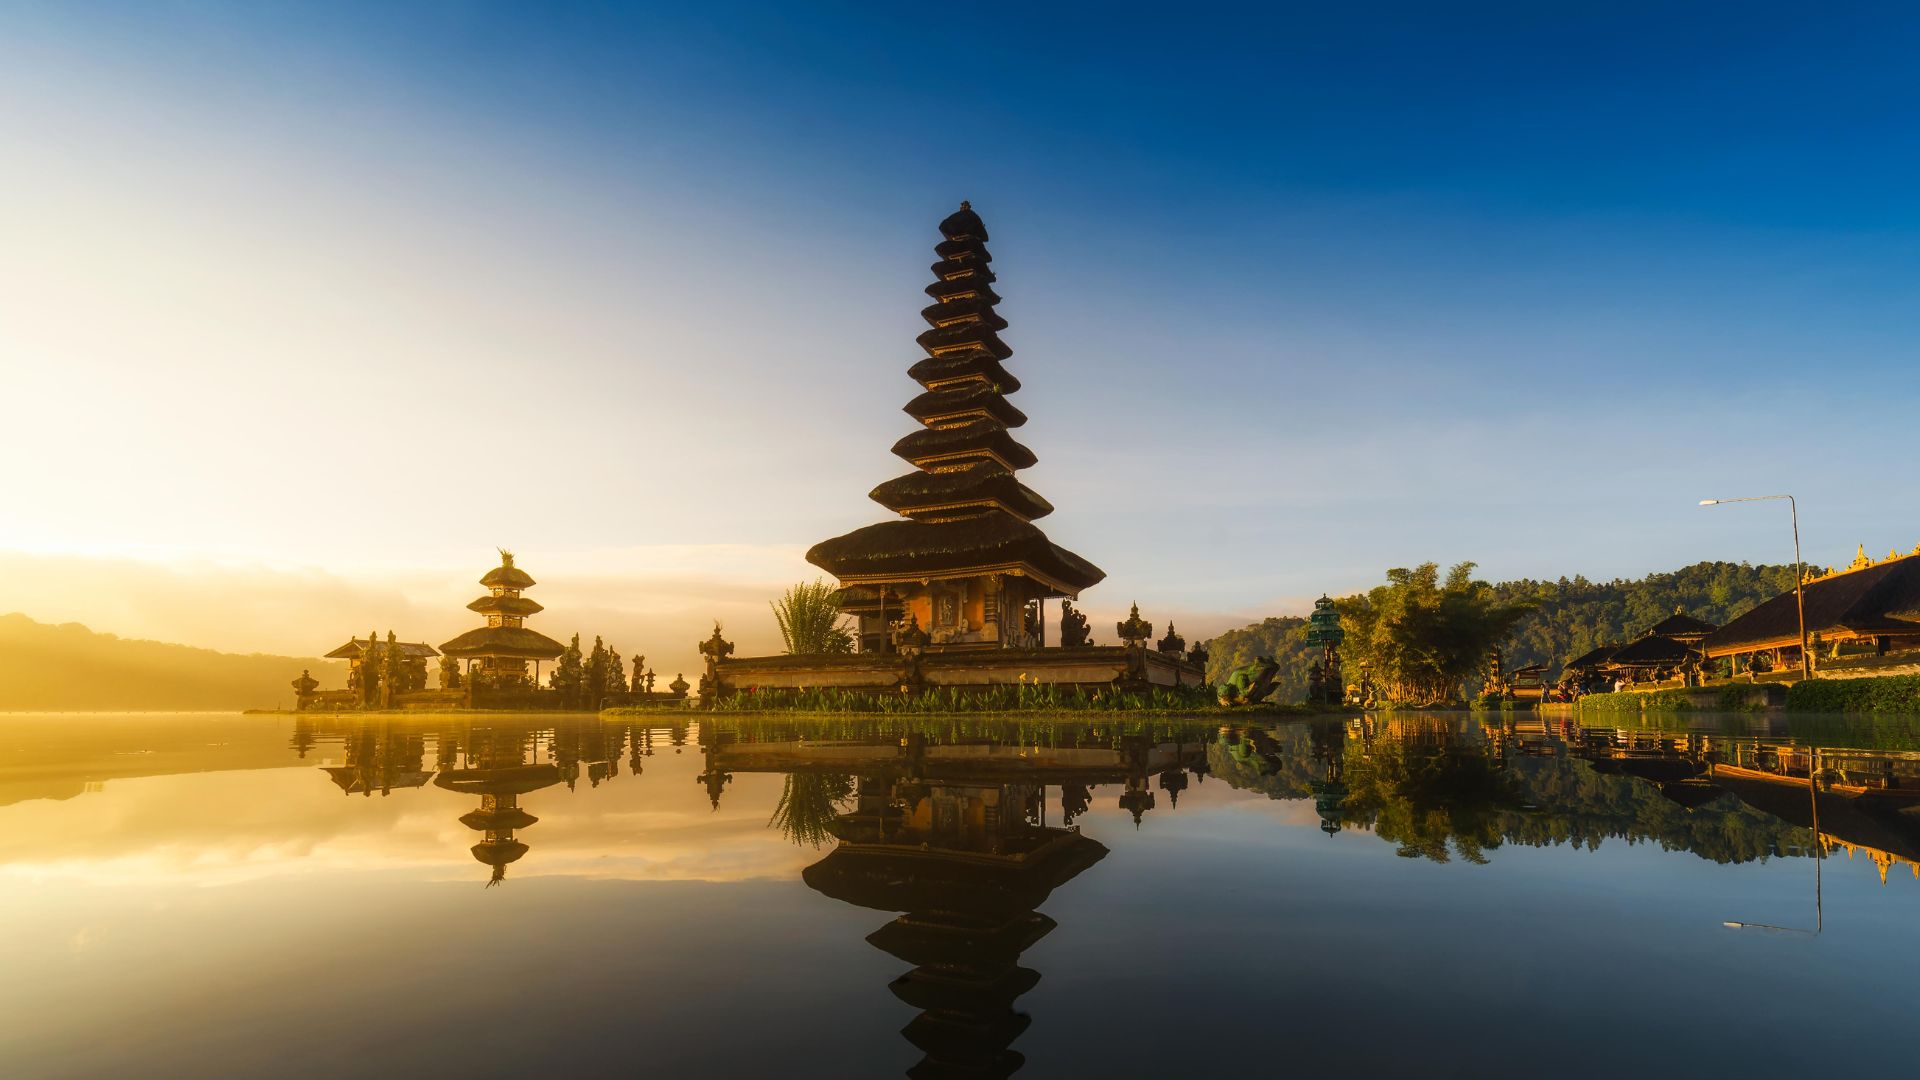 View of the iconic Beratan Temple, a renowned landmark in Bali's tourism scene, beautifully surrounded by pond.